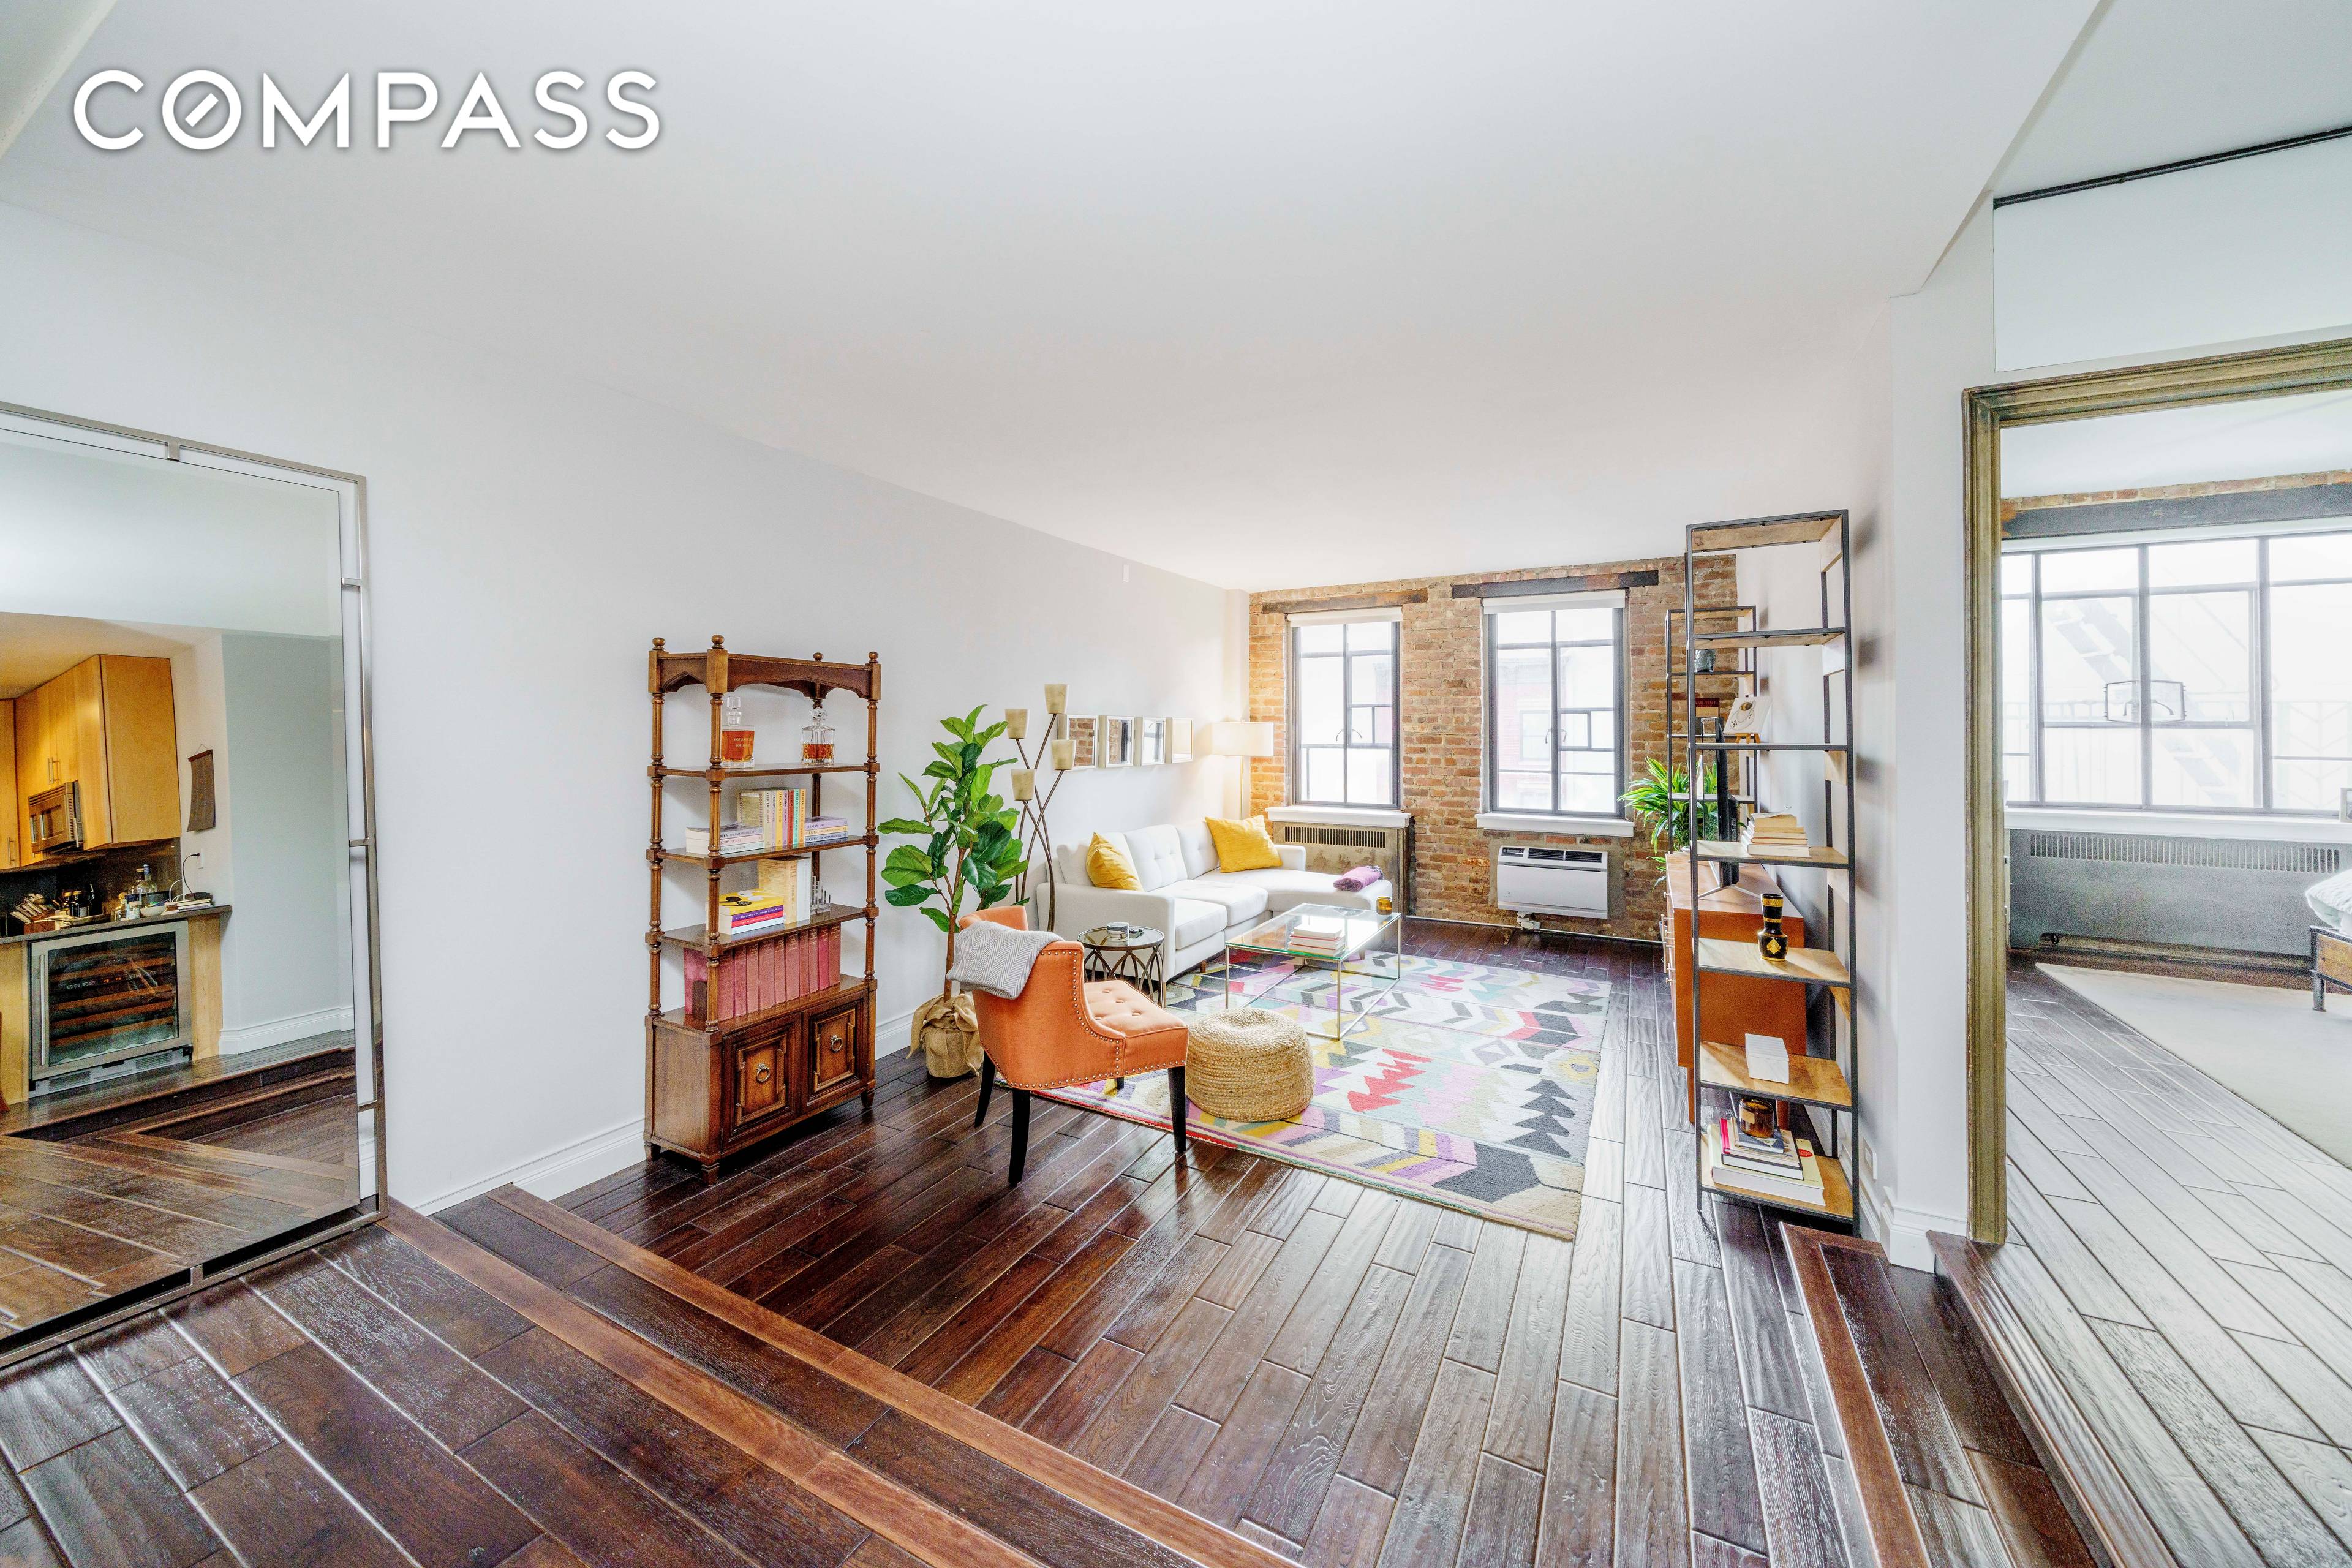 Fall in love instantly with this stunning two bedroom home, meticulously renovated with wide planked oak floors, exposed brick walls, cast iron columns, and soundproof windows.